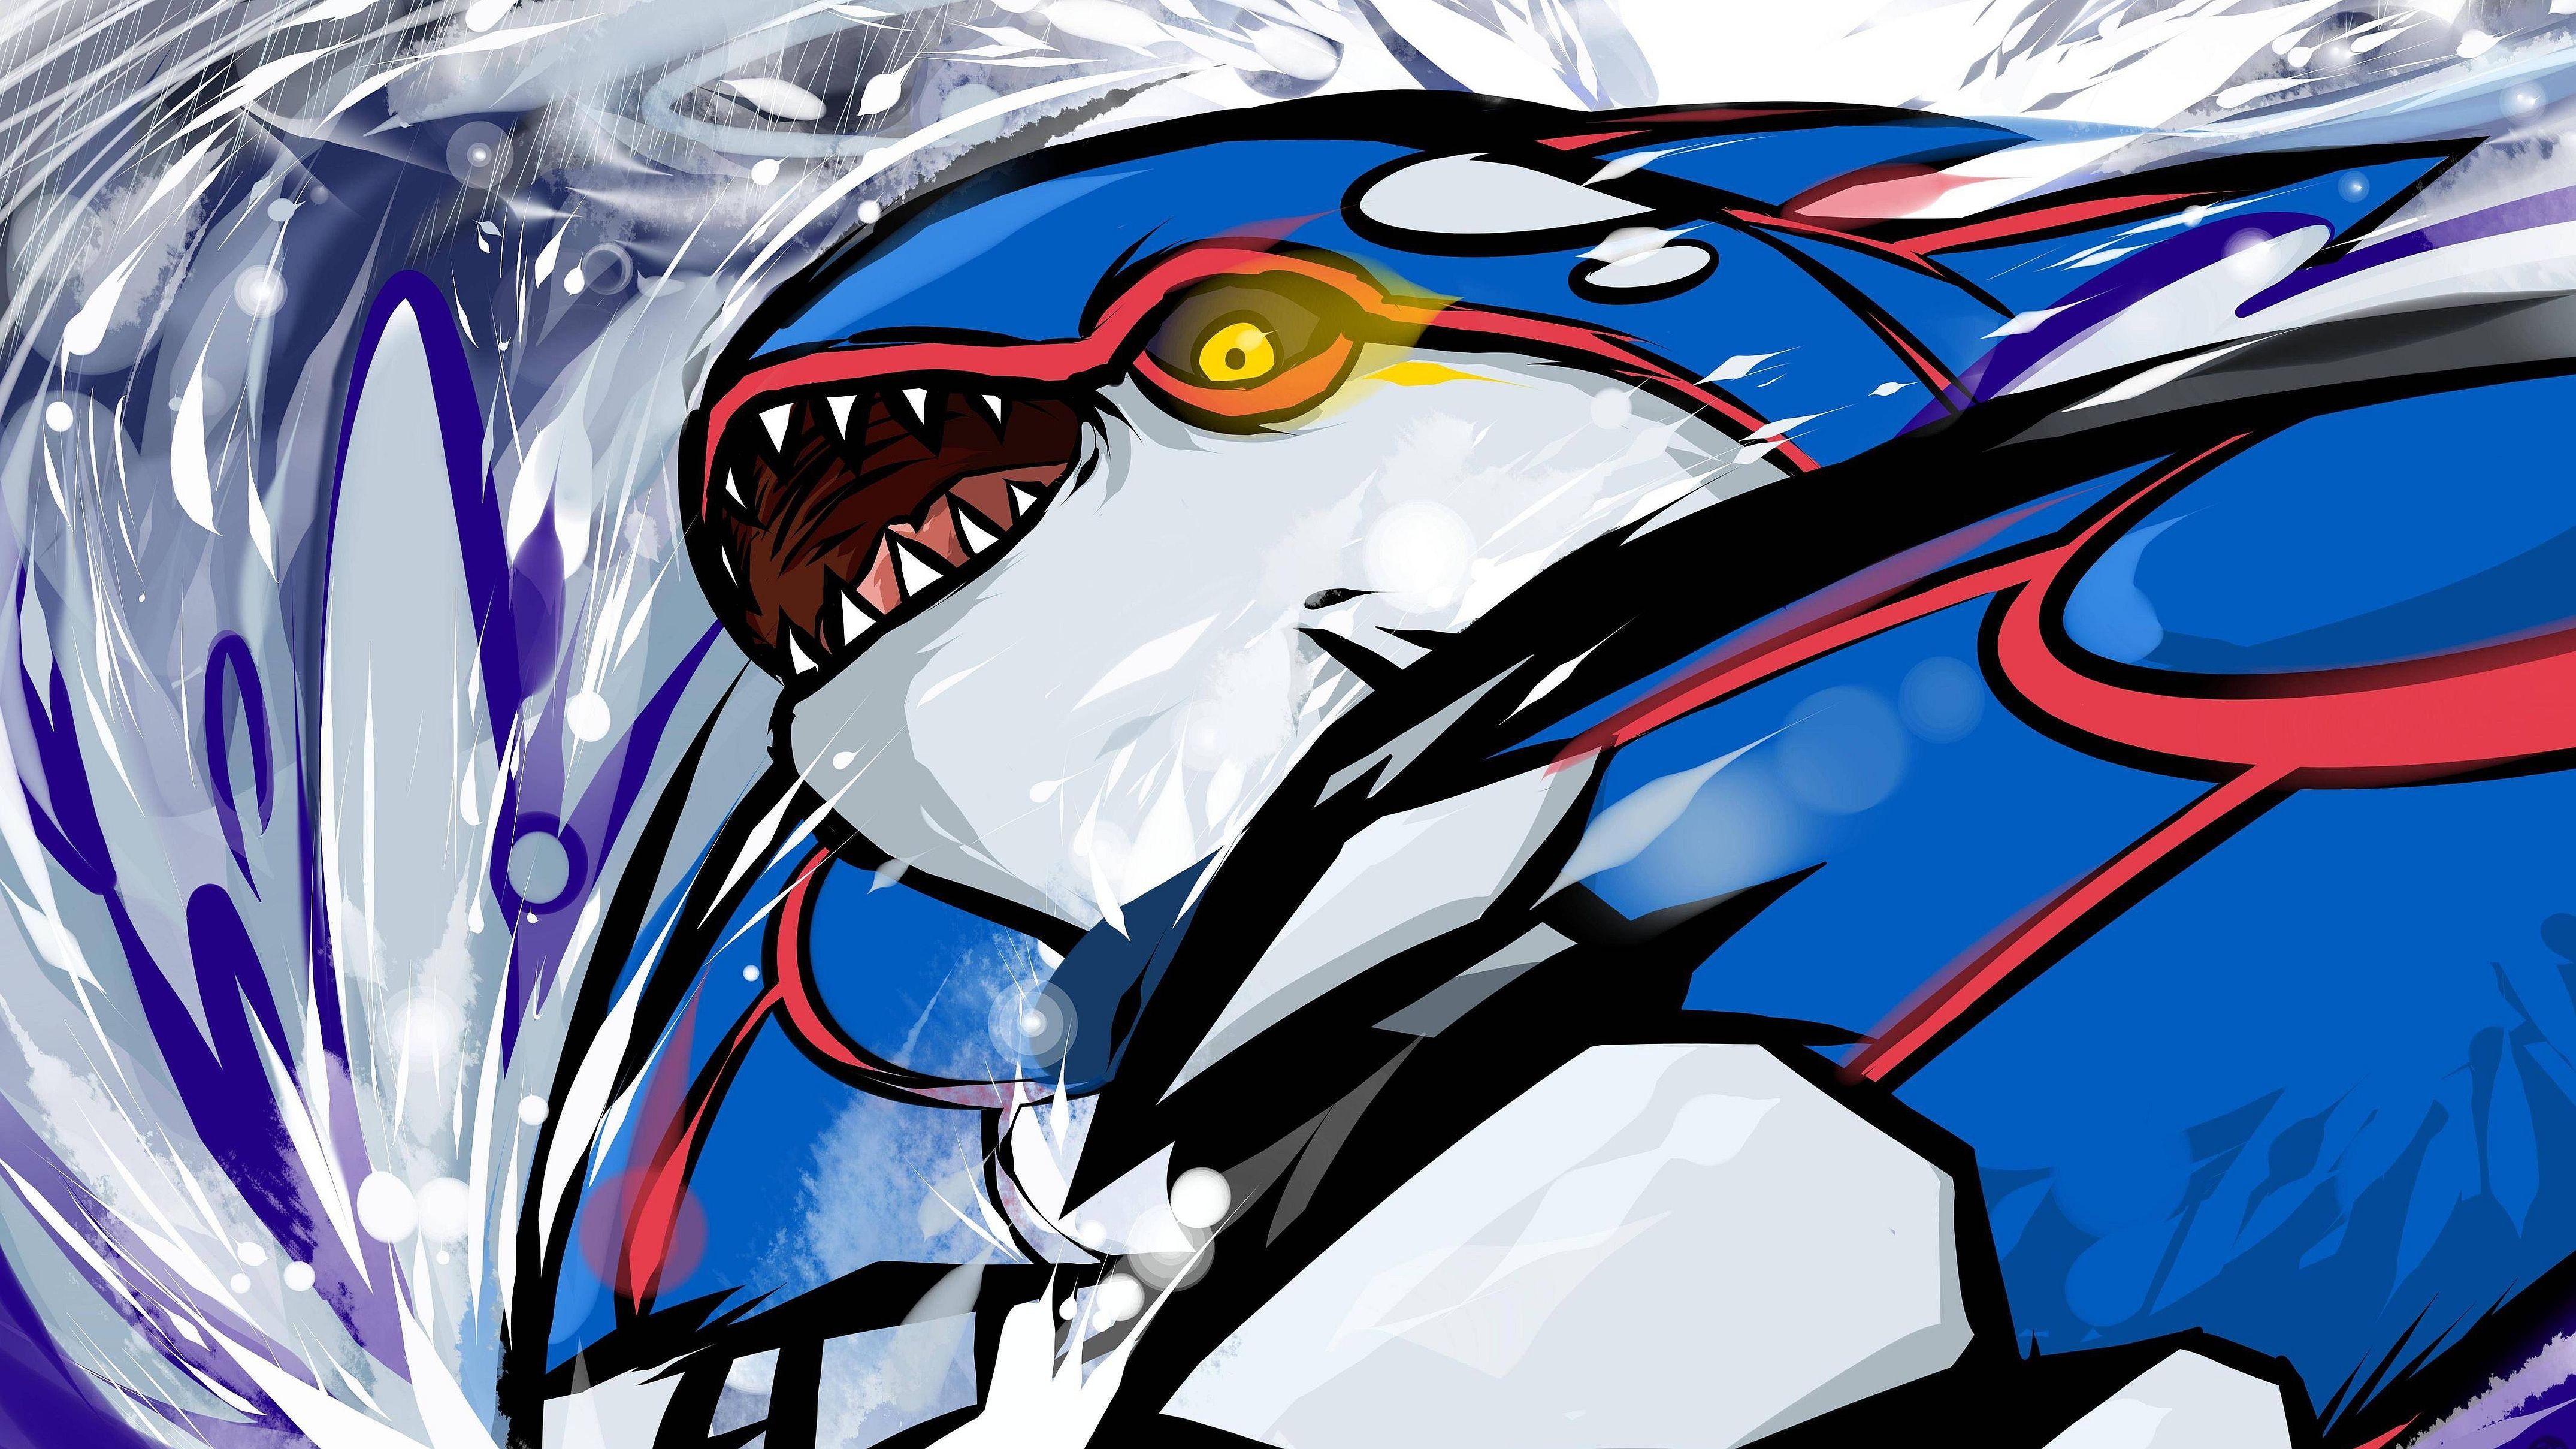 Kyogre (Pokémon) HD Wallpaper and Background Image